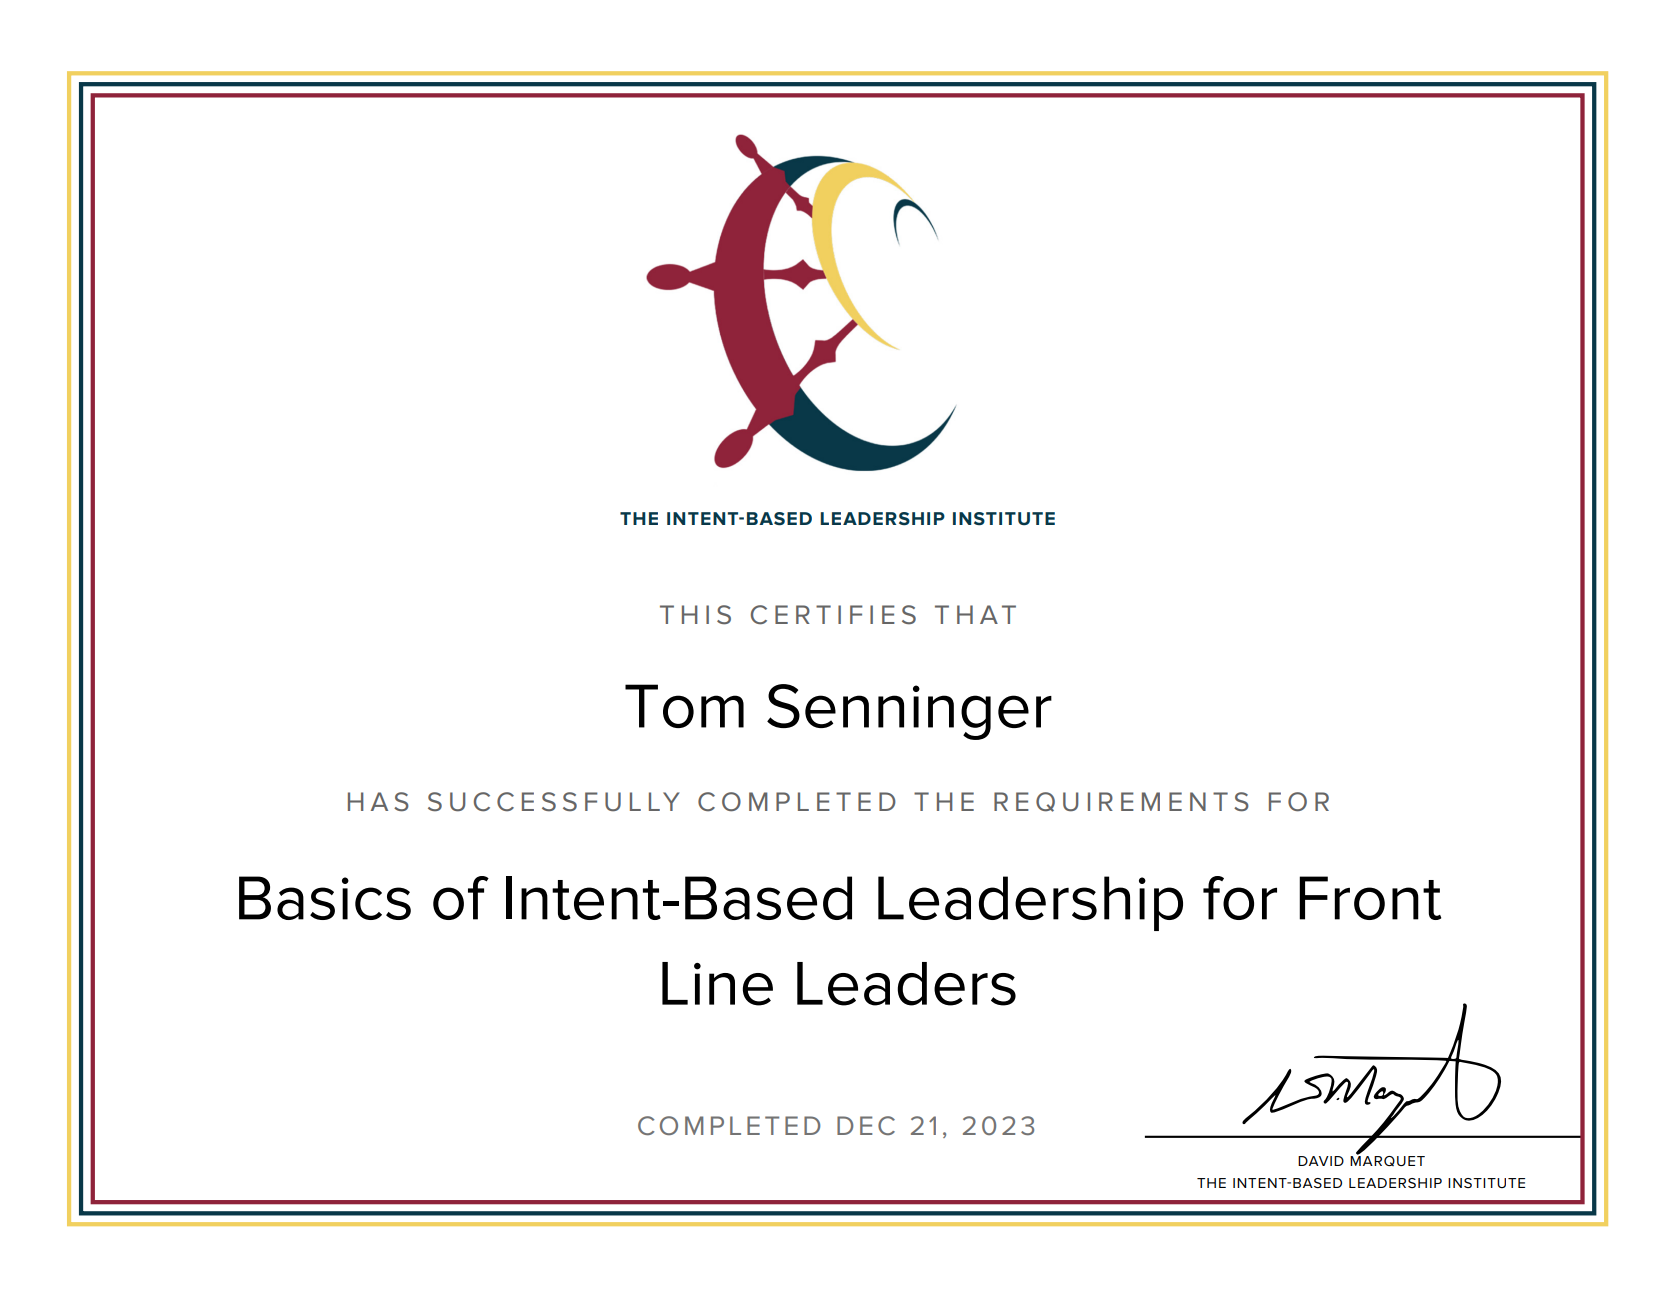 Certified basisc of intent-based leadership by David Marquet